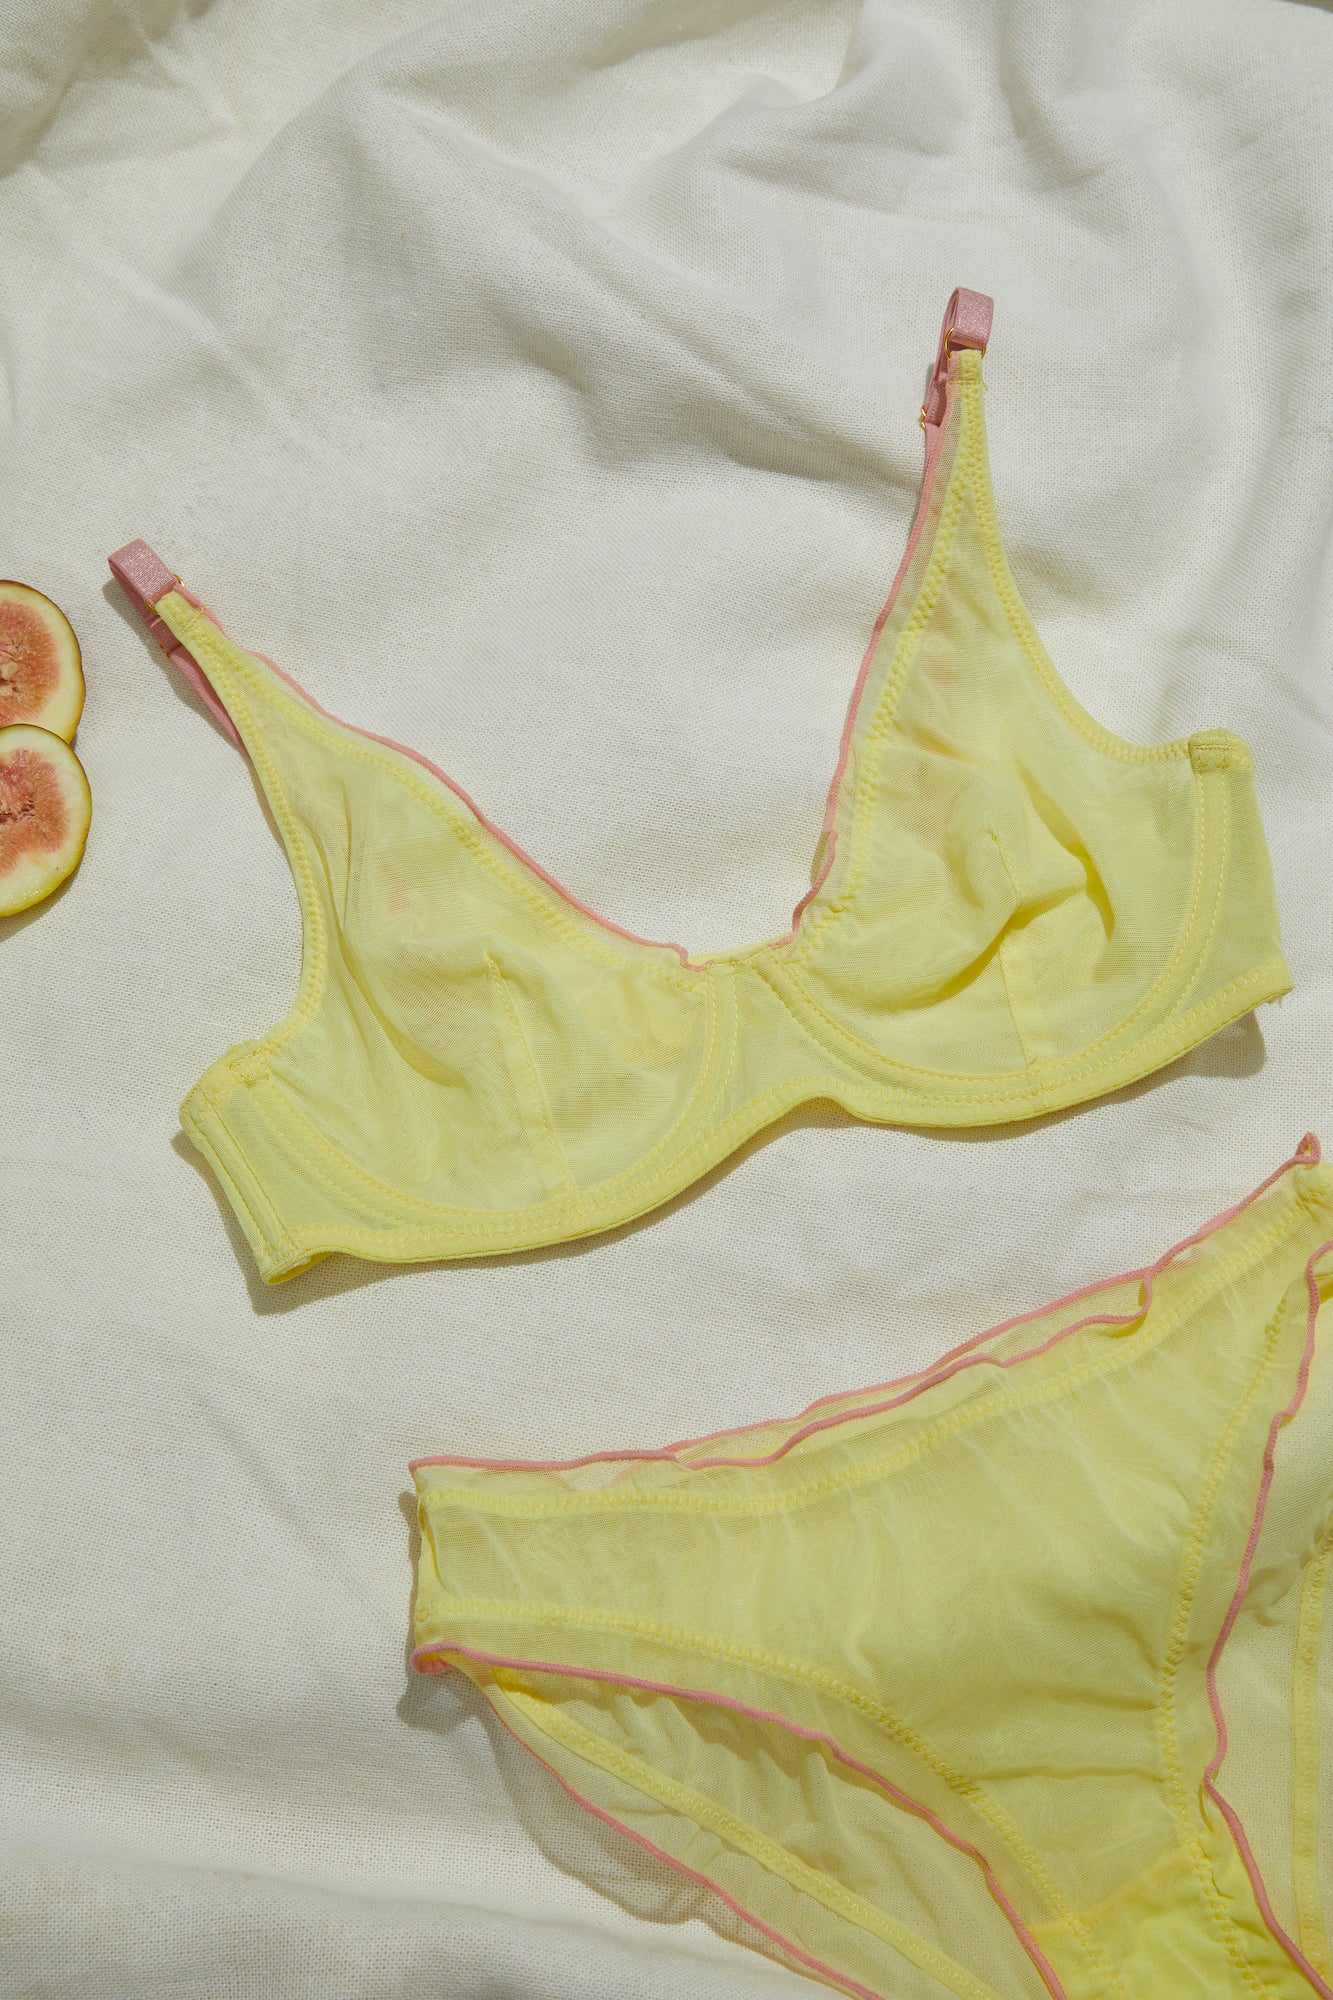 yellow see through lingerie